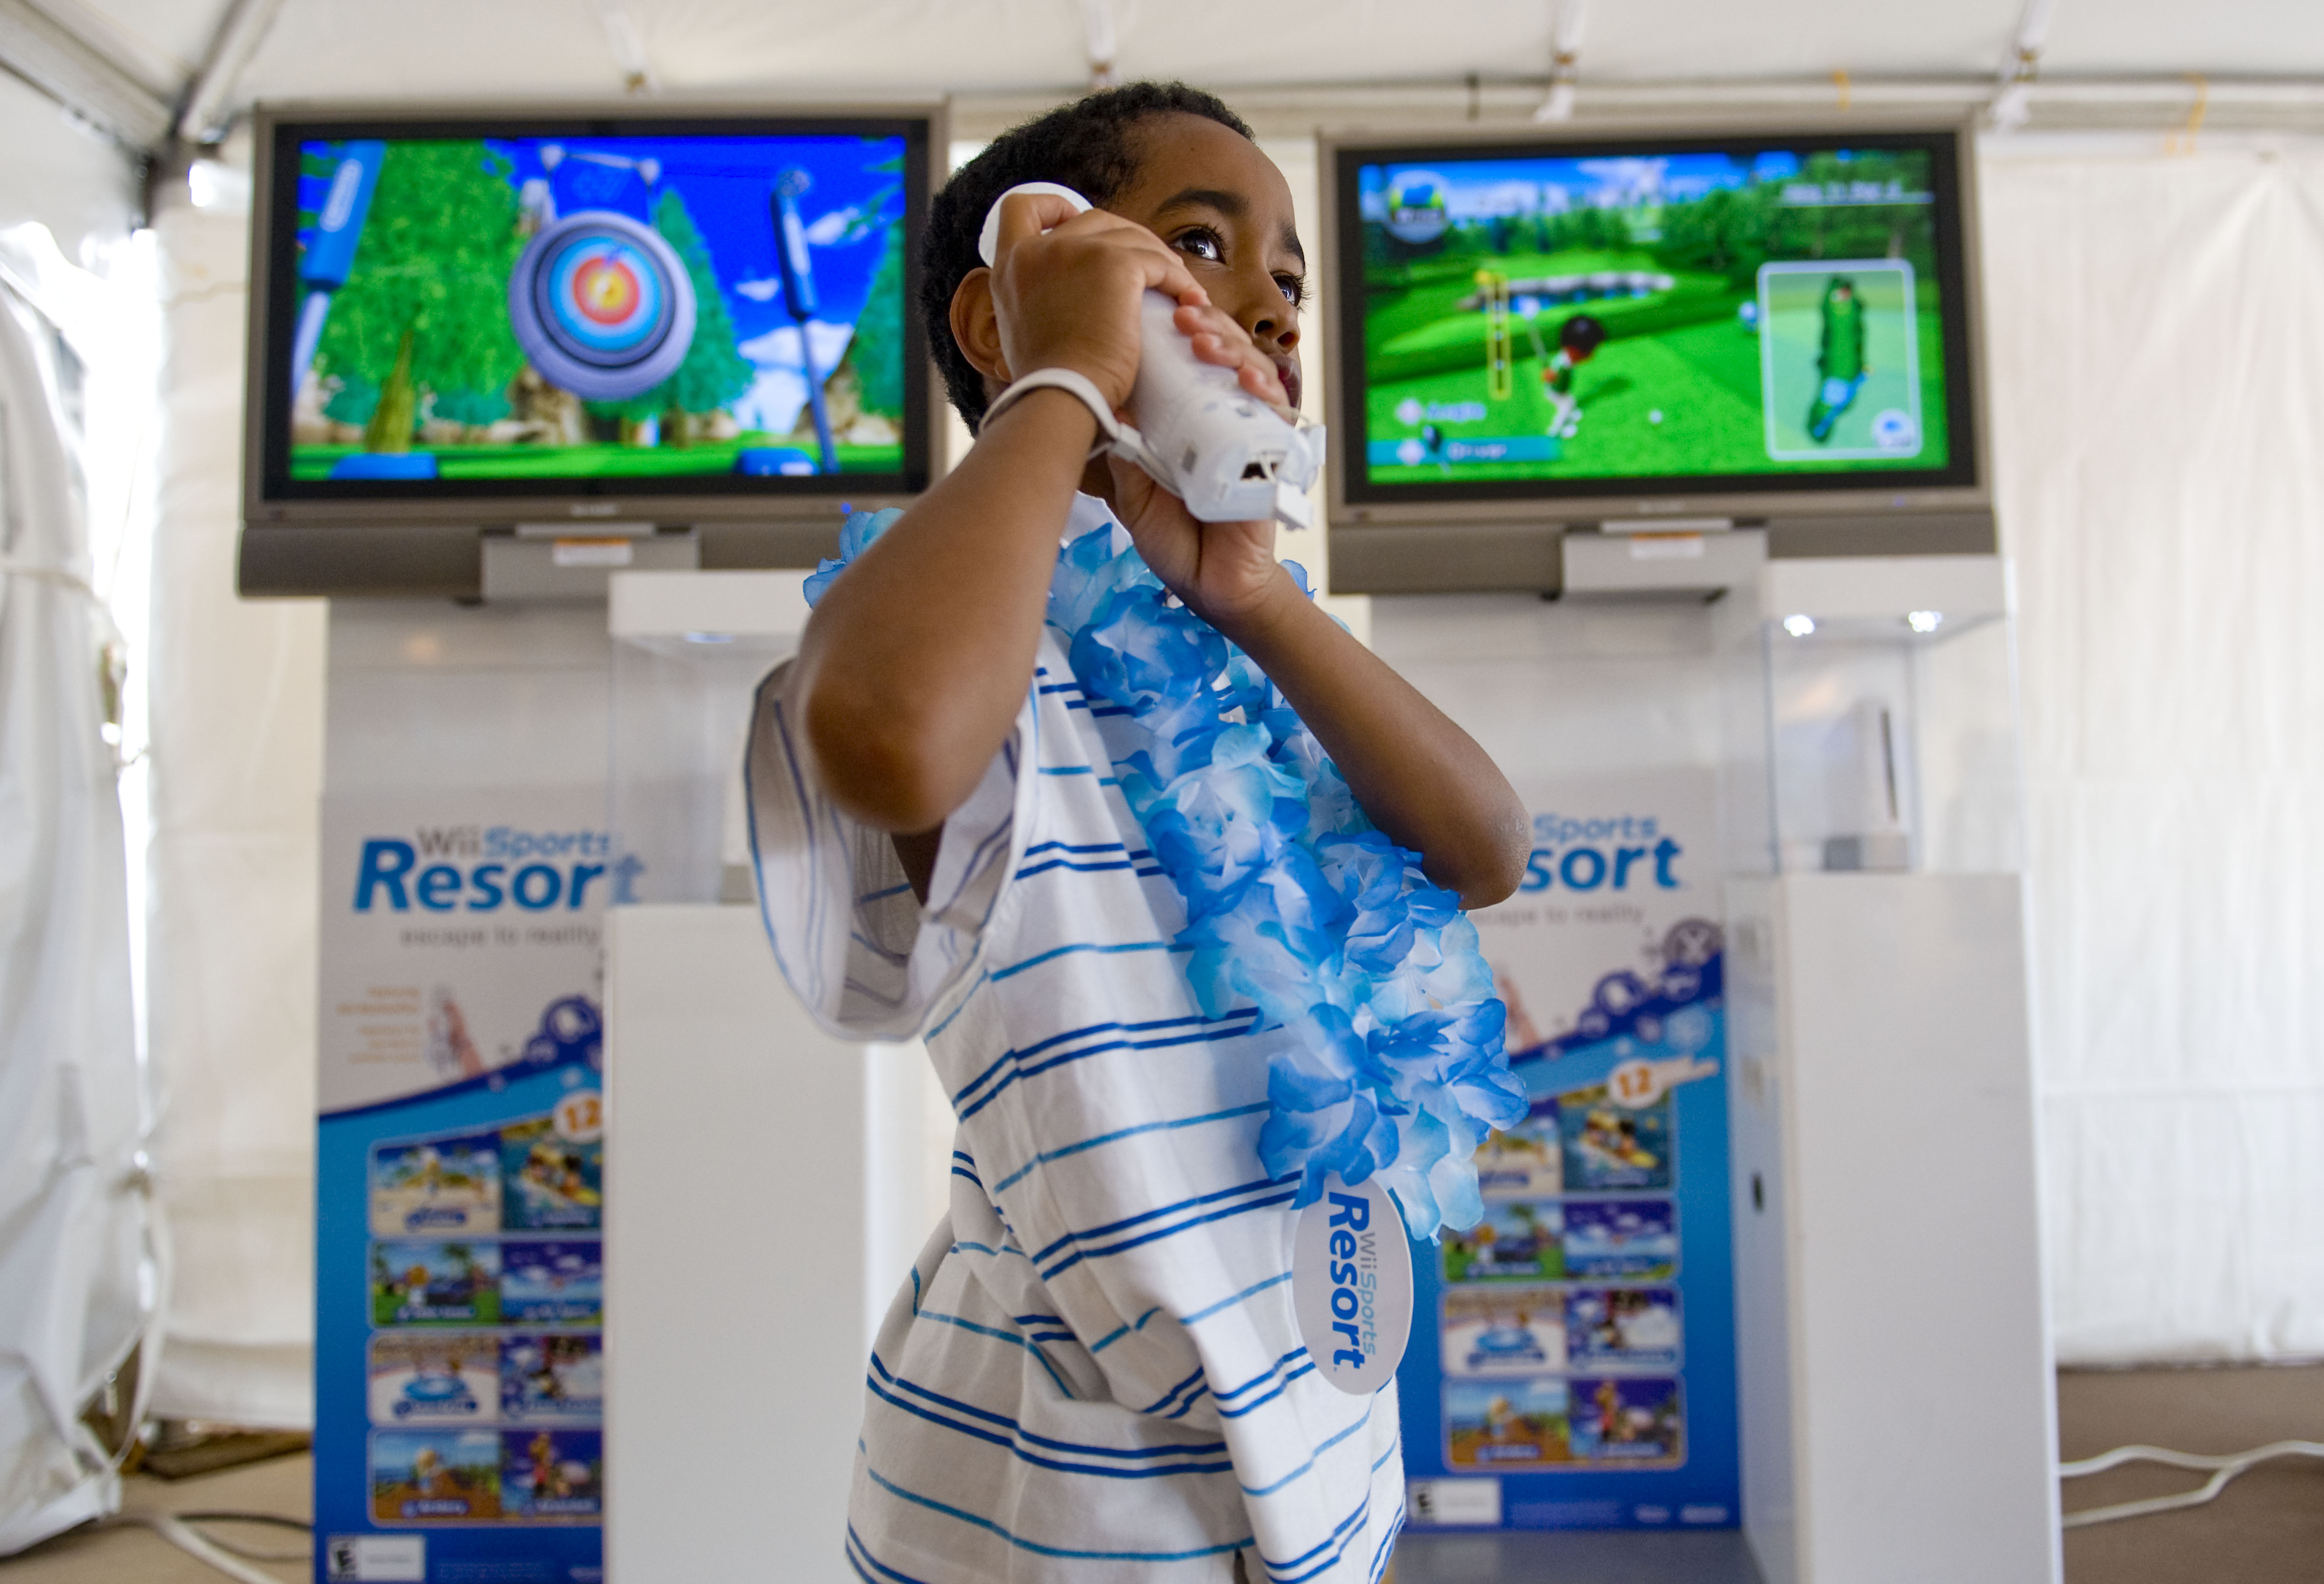 July 24, 2009 -- Wii Sports Resort--Matthew Jagdeo tries out the new Wii Sports Resort game which wa